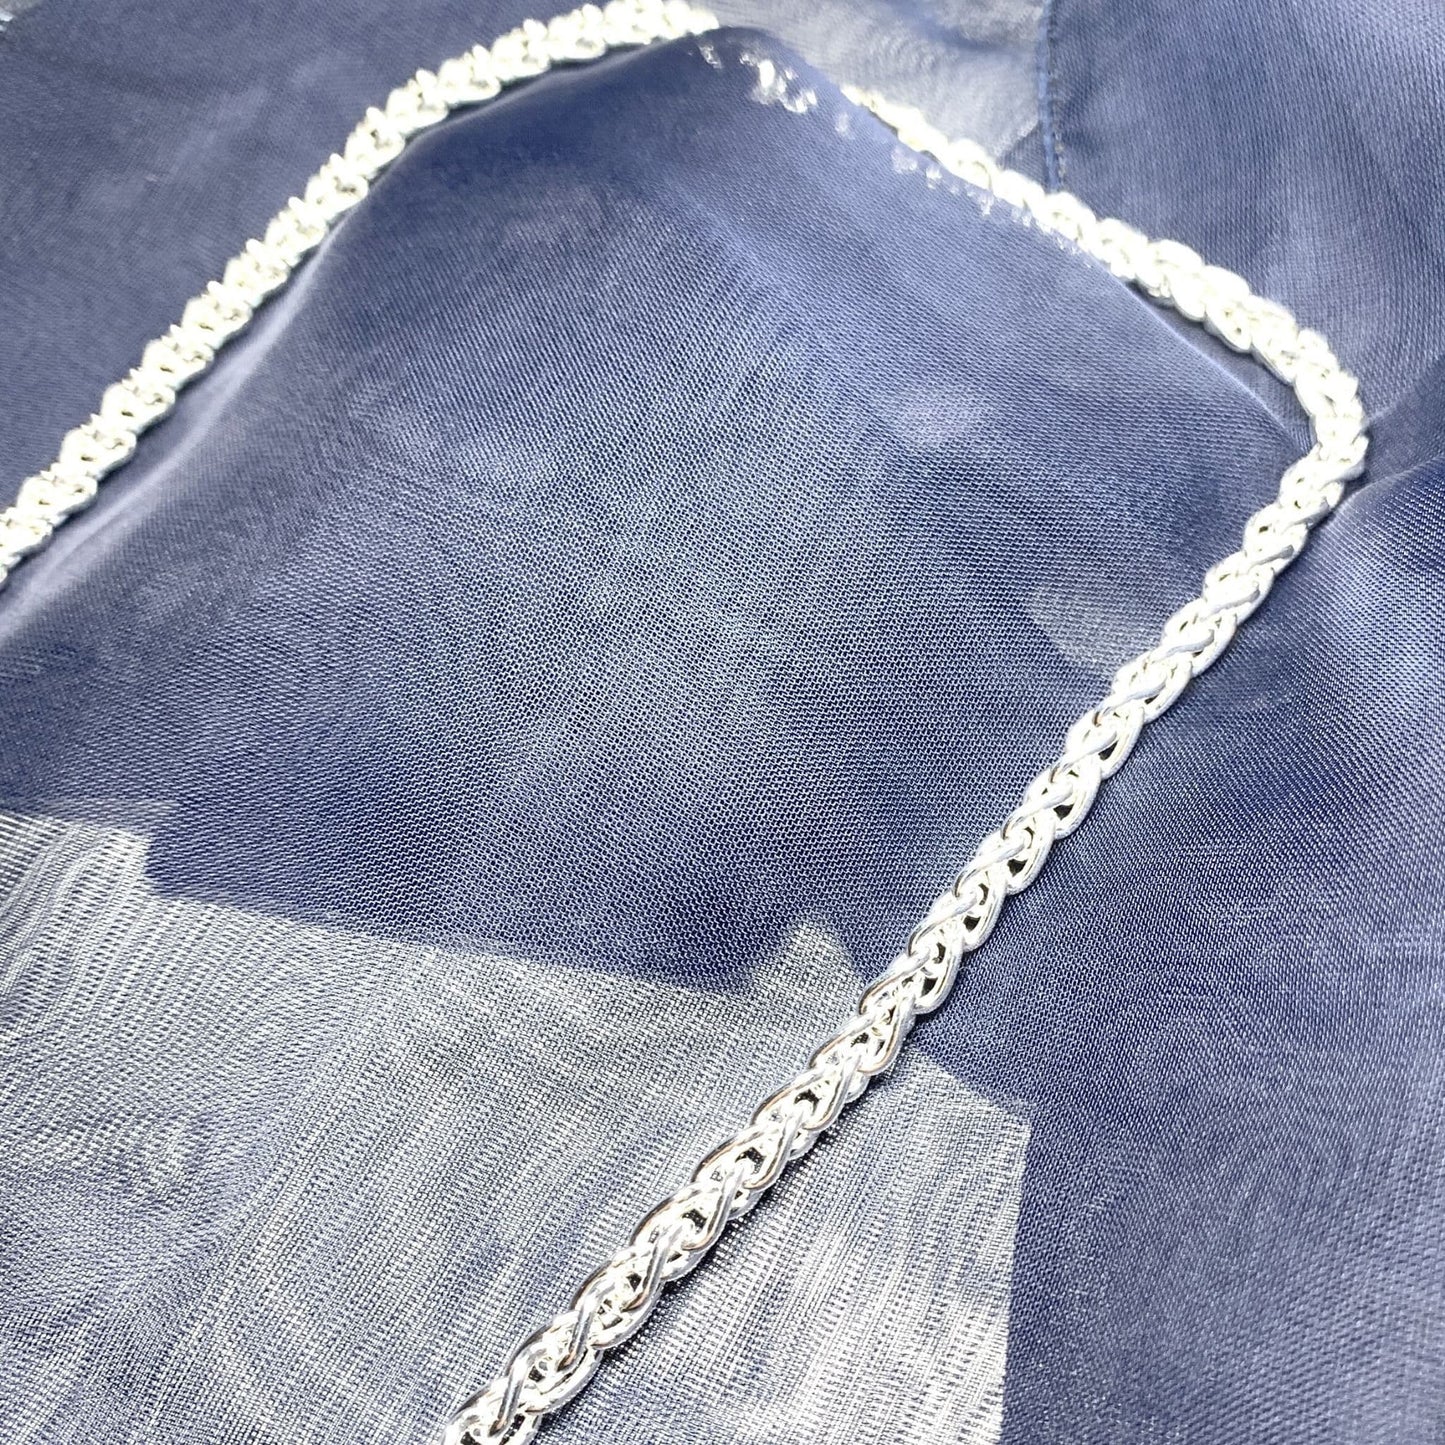 Men's sterling silver round Spiga necklace chain 22 inches